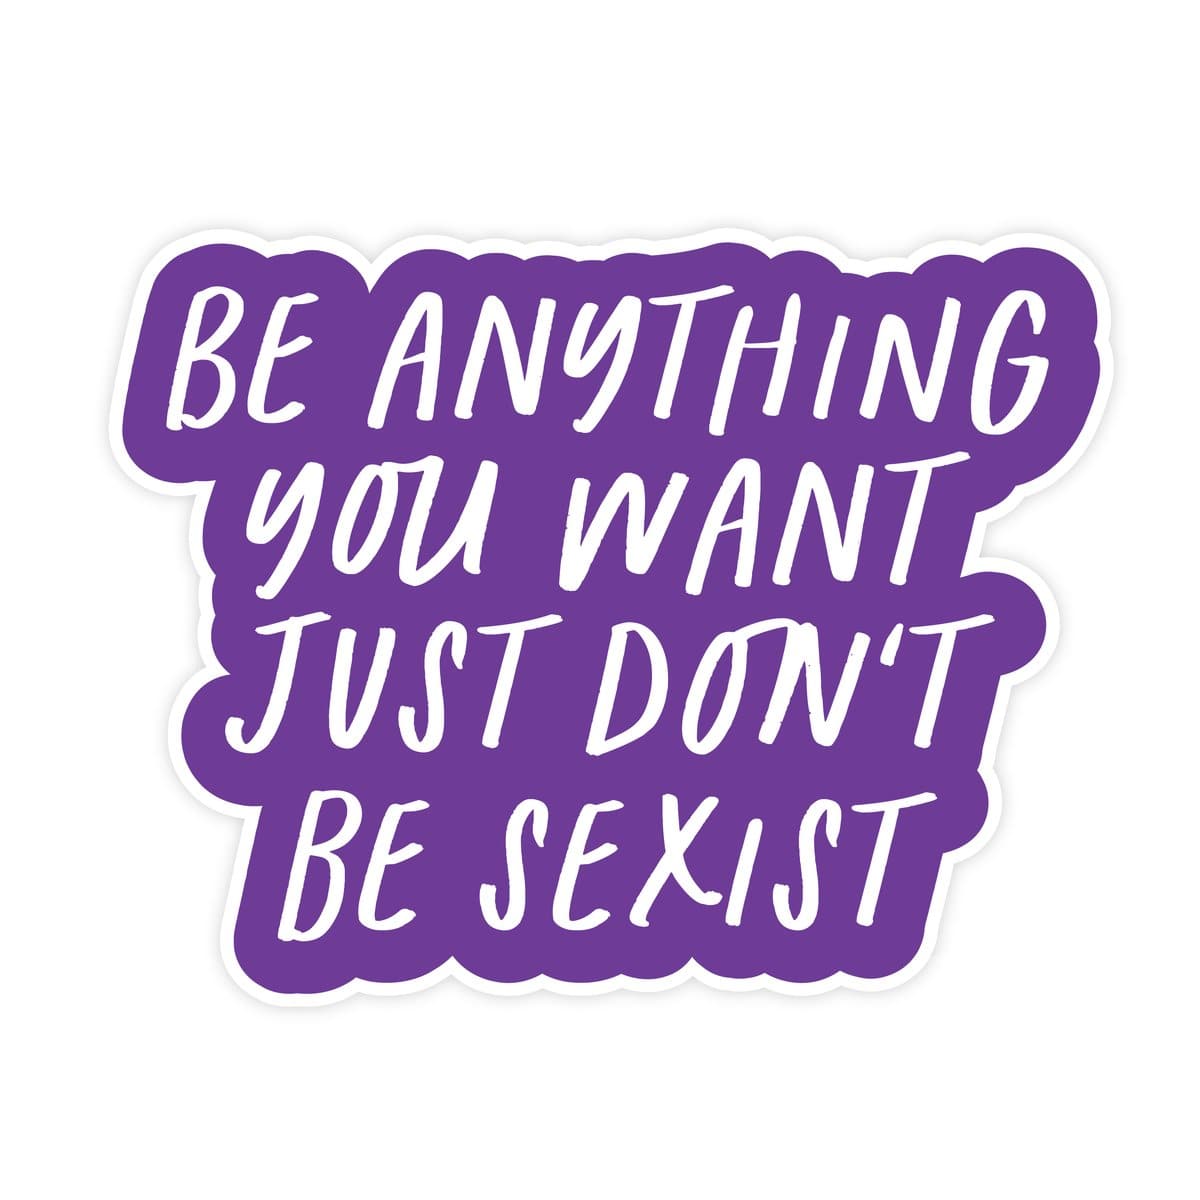 Don't be Sexist | Sticker - The Local Space